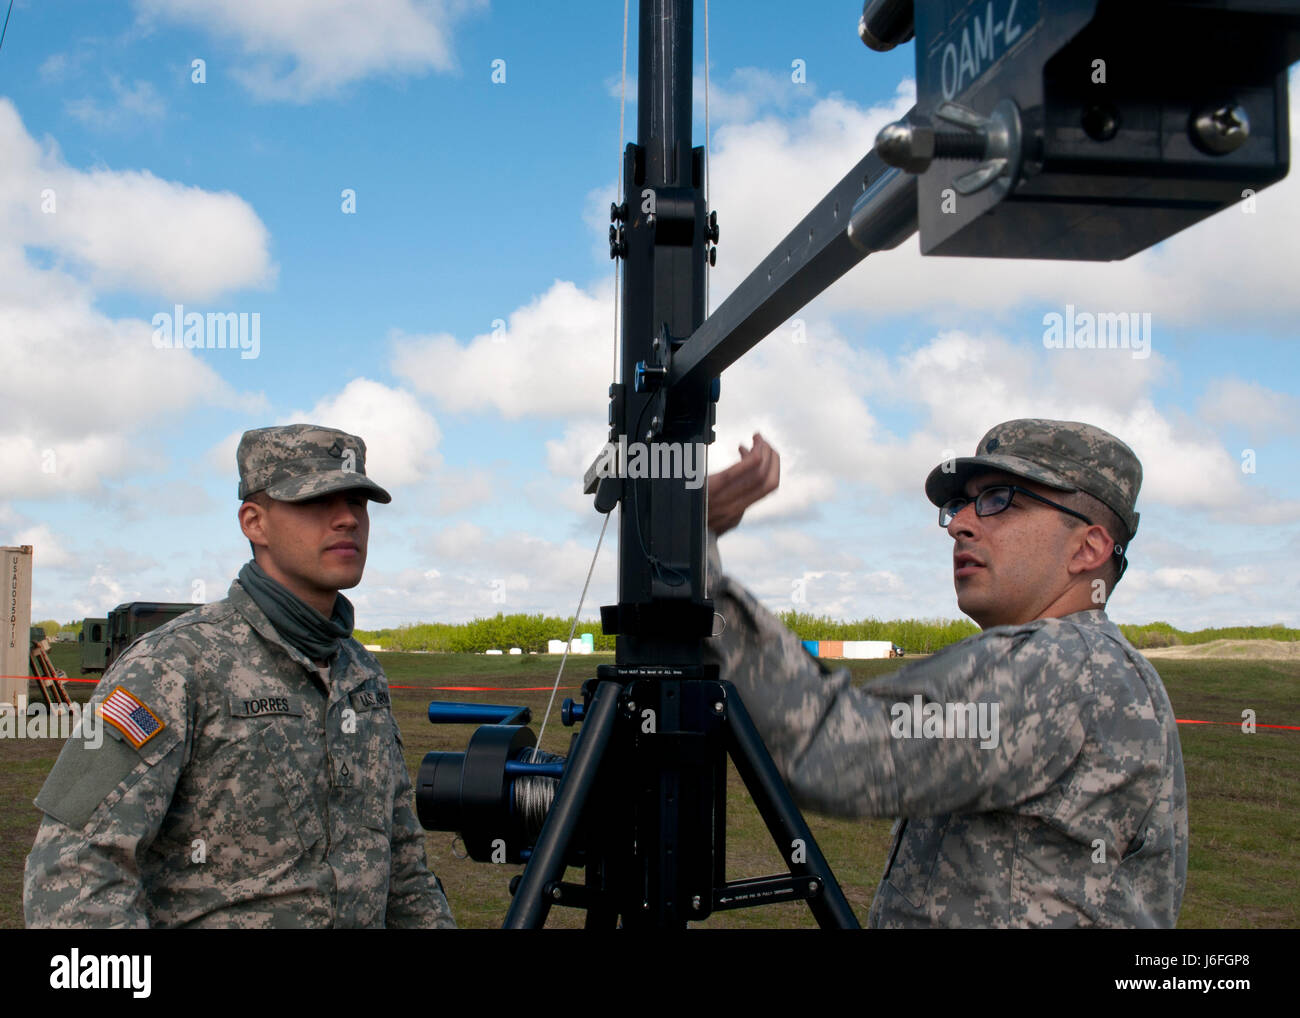 Pfc. Ismael Torres, a cable system installer maintainer, left, and Spc. Cody Gomez, a microwave system operator maintainer, prepare to raise a transmission antenna during Exercise Maple Resolve 17 at Camp Wainwright, Alberta, May 16, 2017. Torres and Gomez, both California natives, belong to the 306th Psychological Operations Company. Exercise Maple Resolve is an annual collective training event designed for any  contigency operation. Approximately 4,000 Canadian and 1,000 U.S. troops are participating in Exercise Maple Resolve 17. Stock Photo